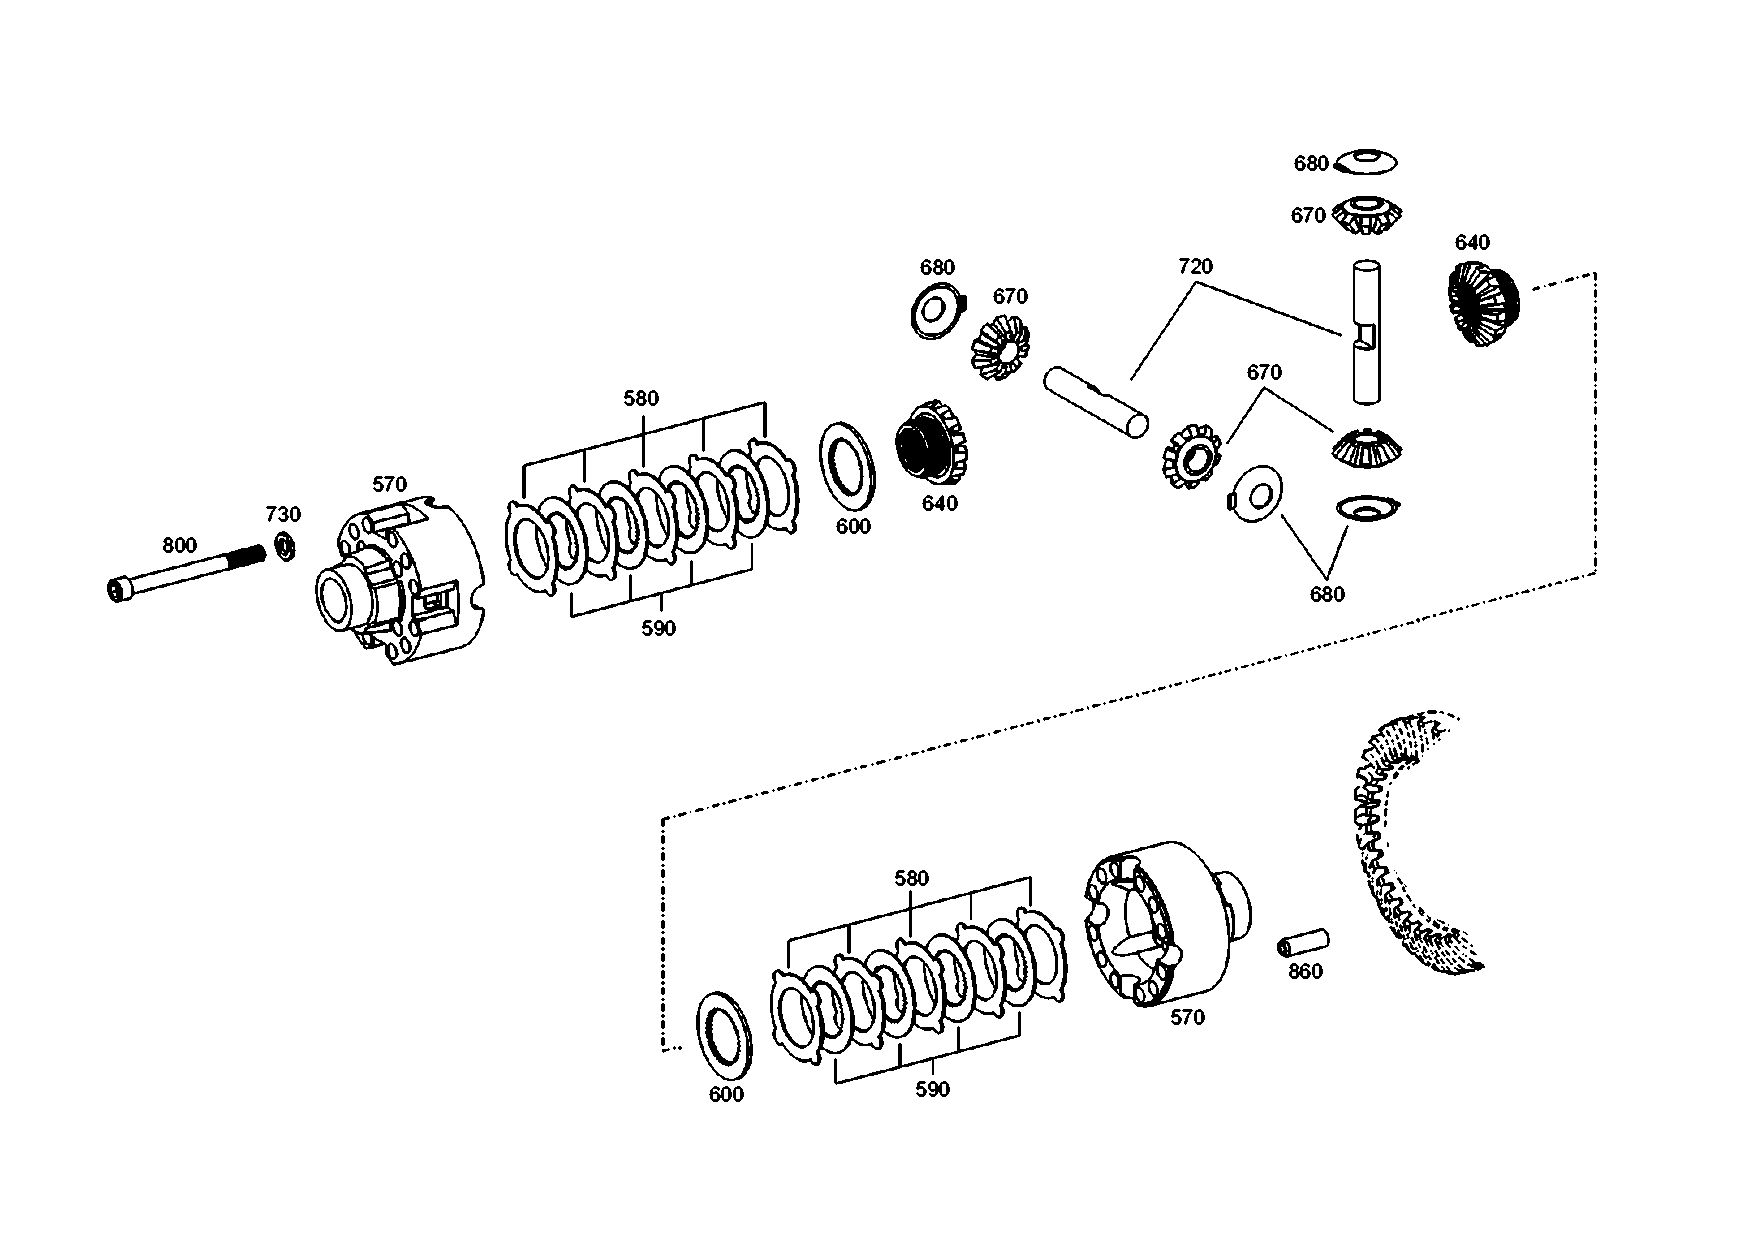 drawing for AGCO F198300020110 - AXLE BEVEL GEAR (figure 4)